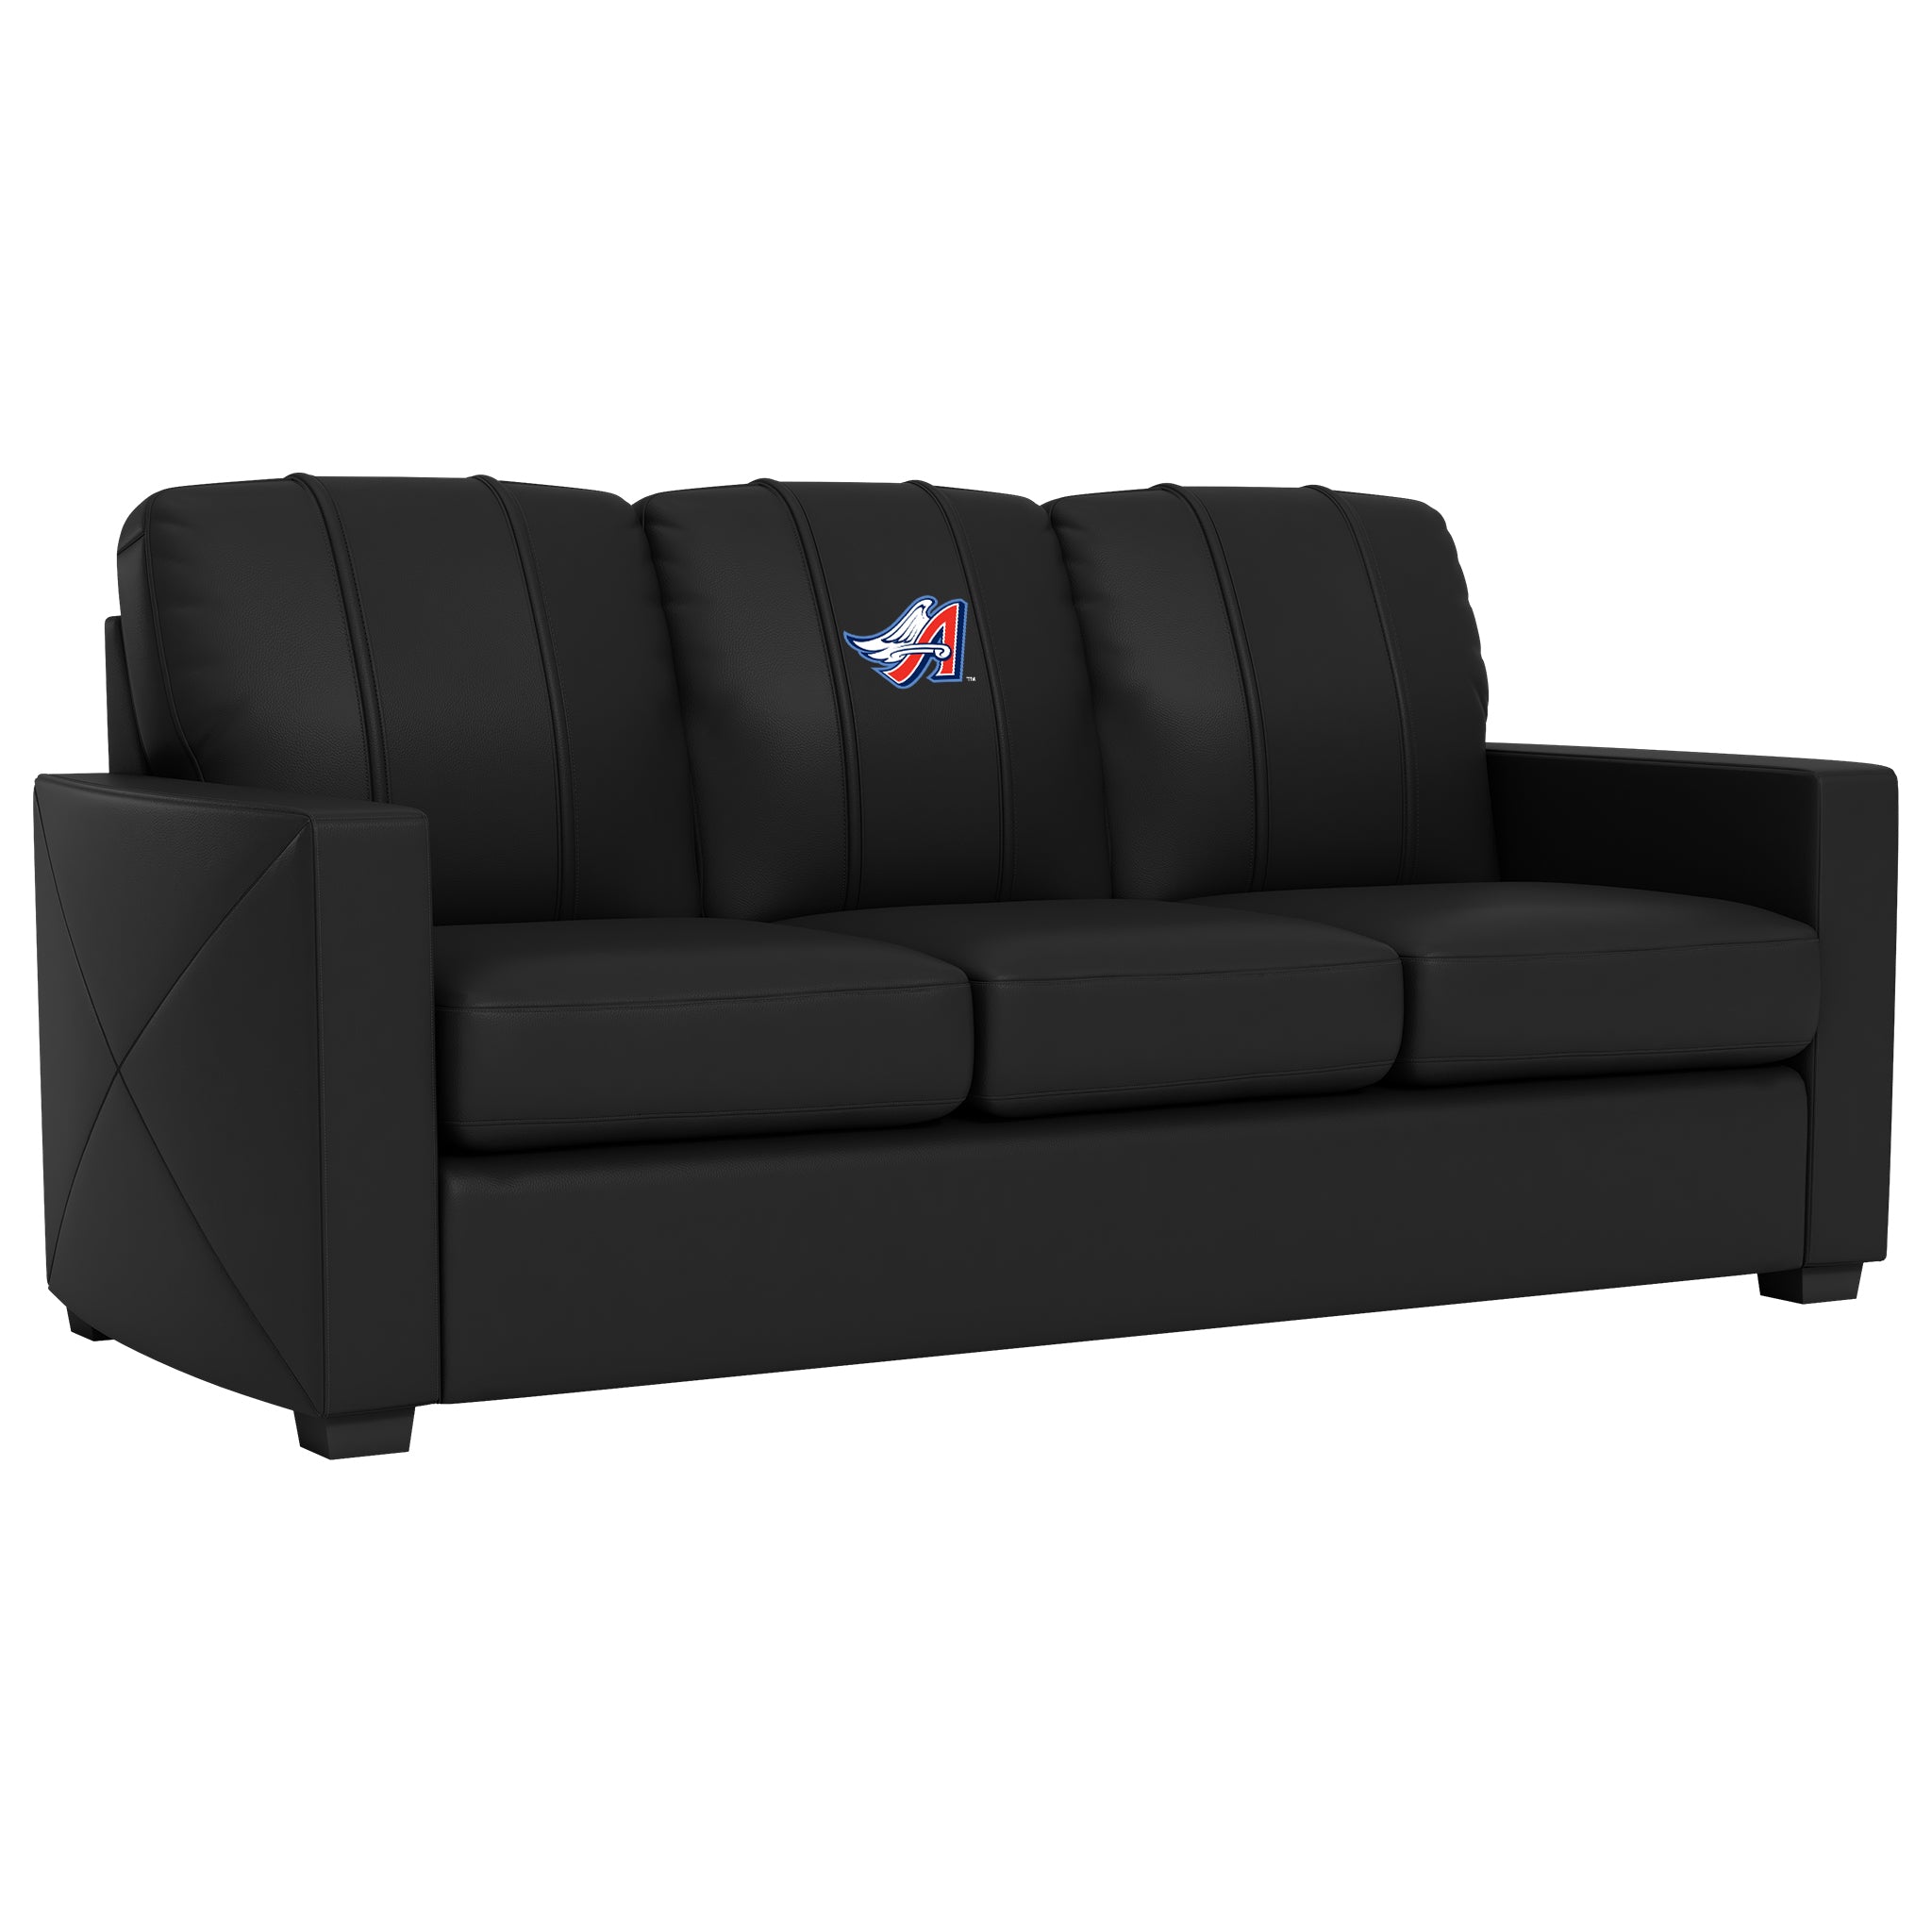 Silver Sofa with California Angels Cooperstown Primary